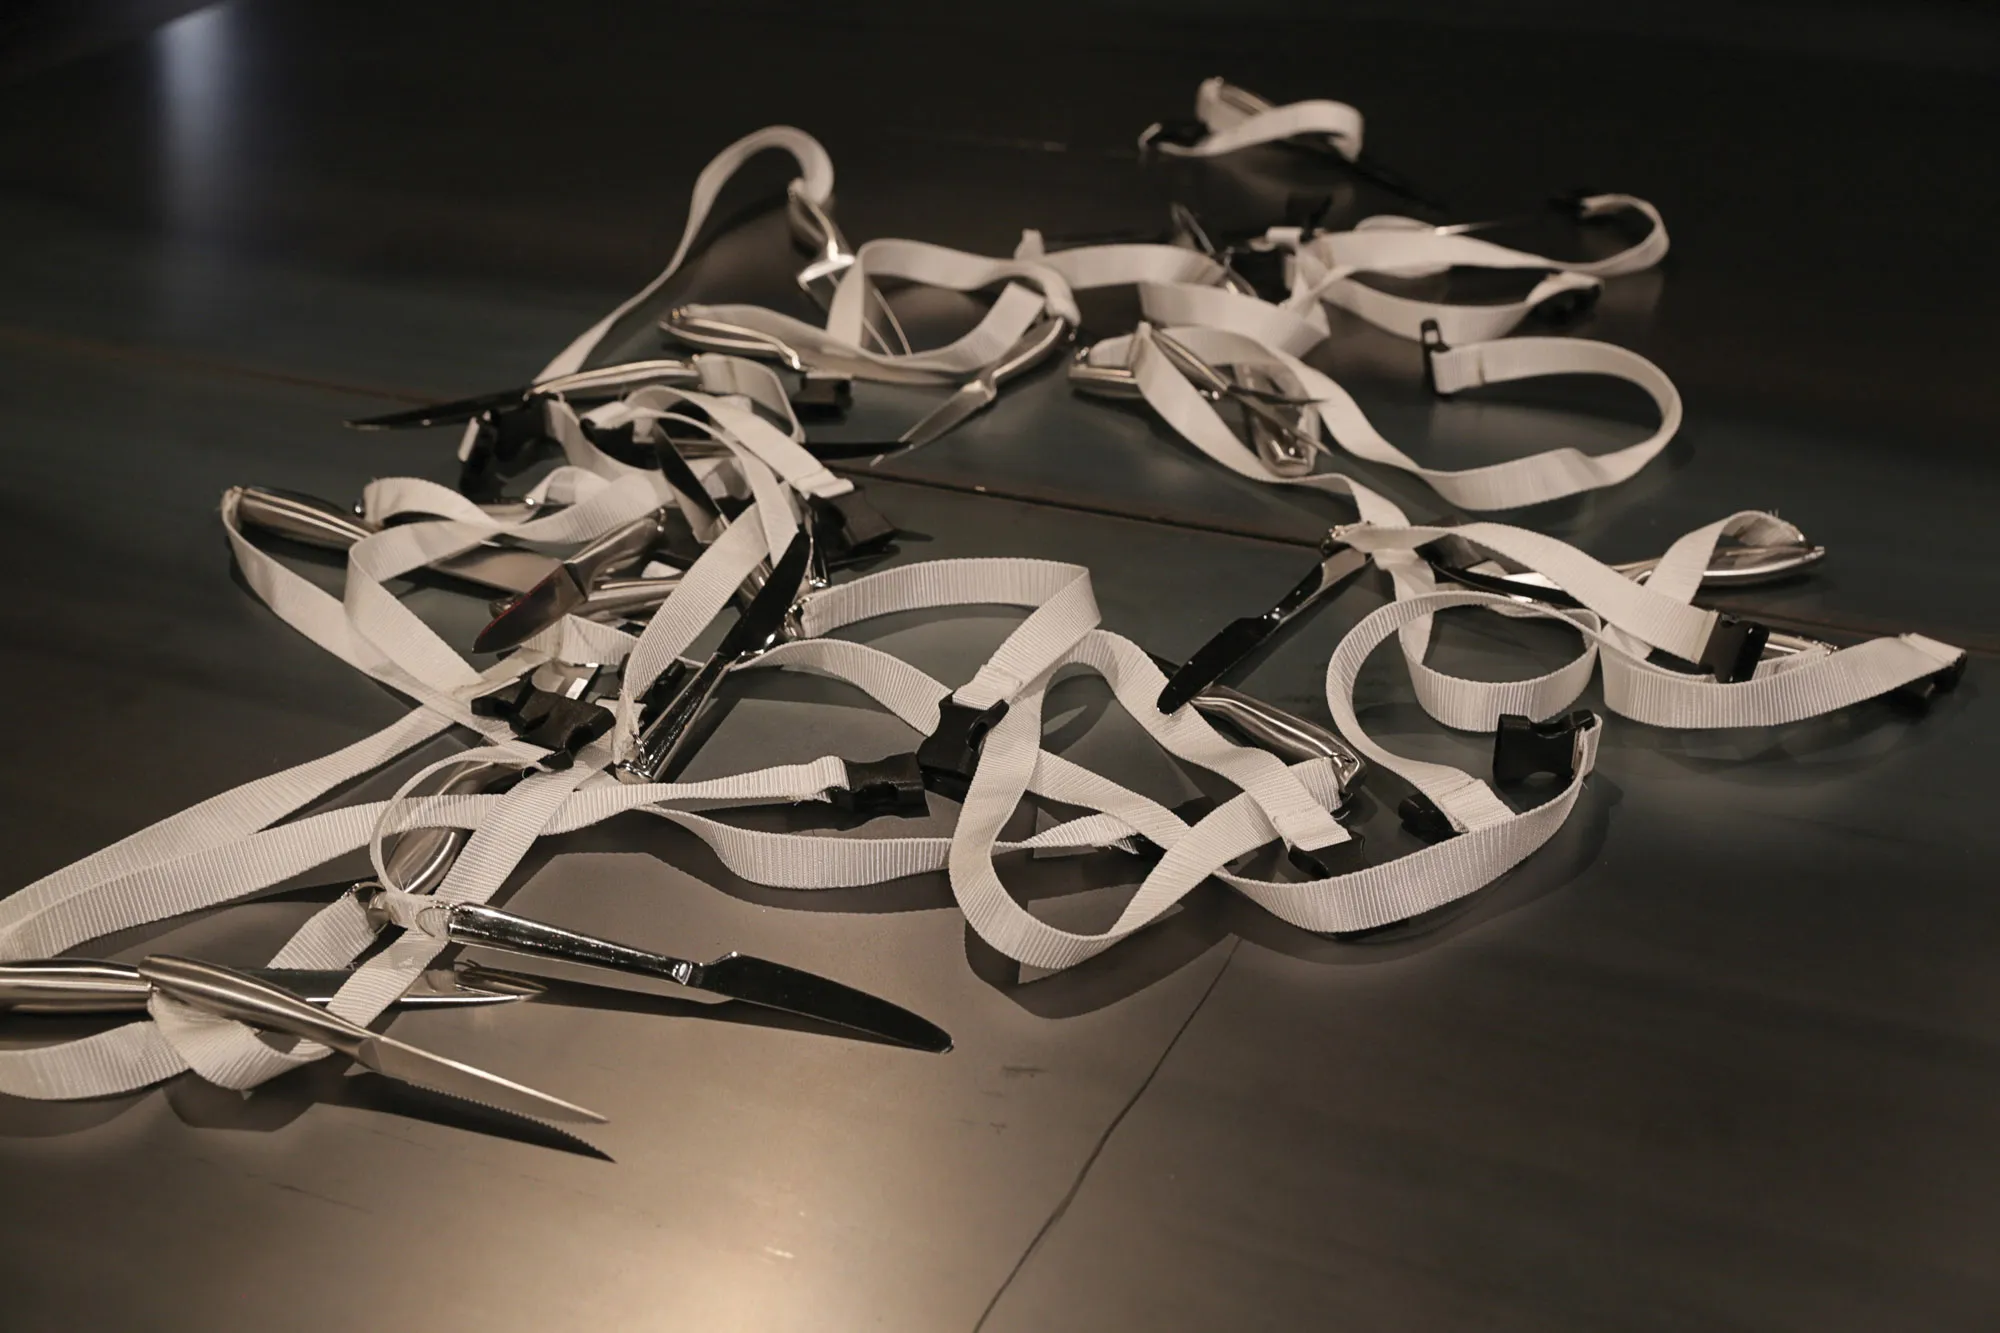 A white strap tangled with butter knives attached lying on a black floor.